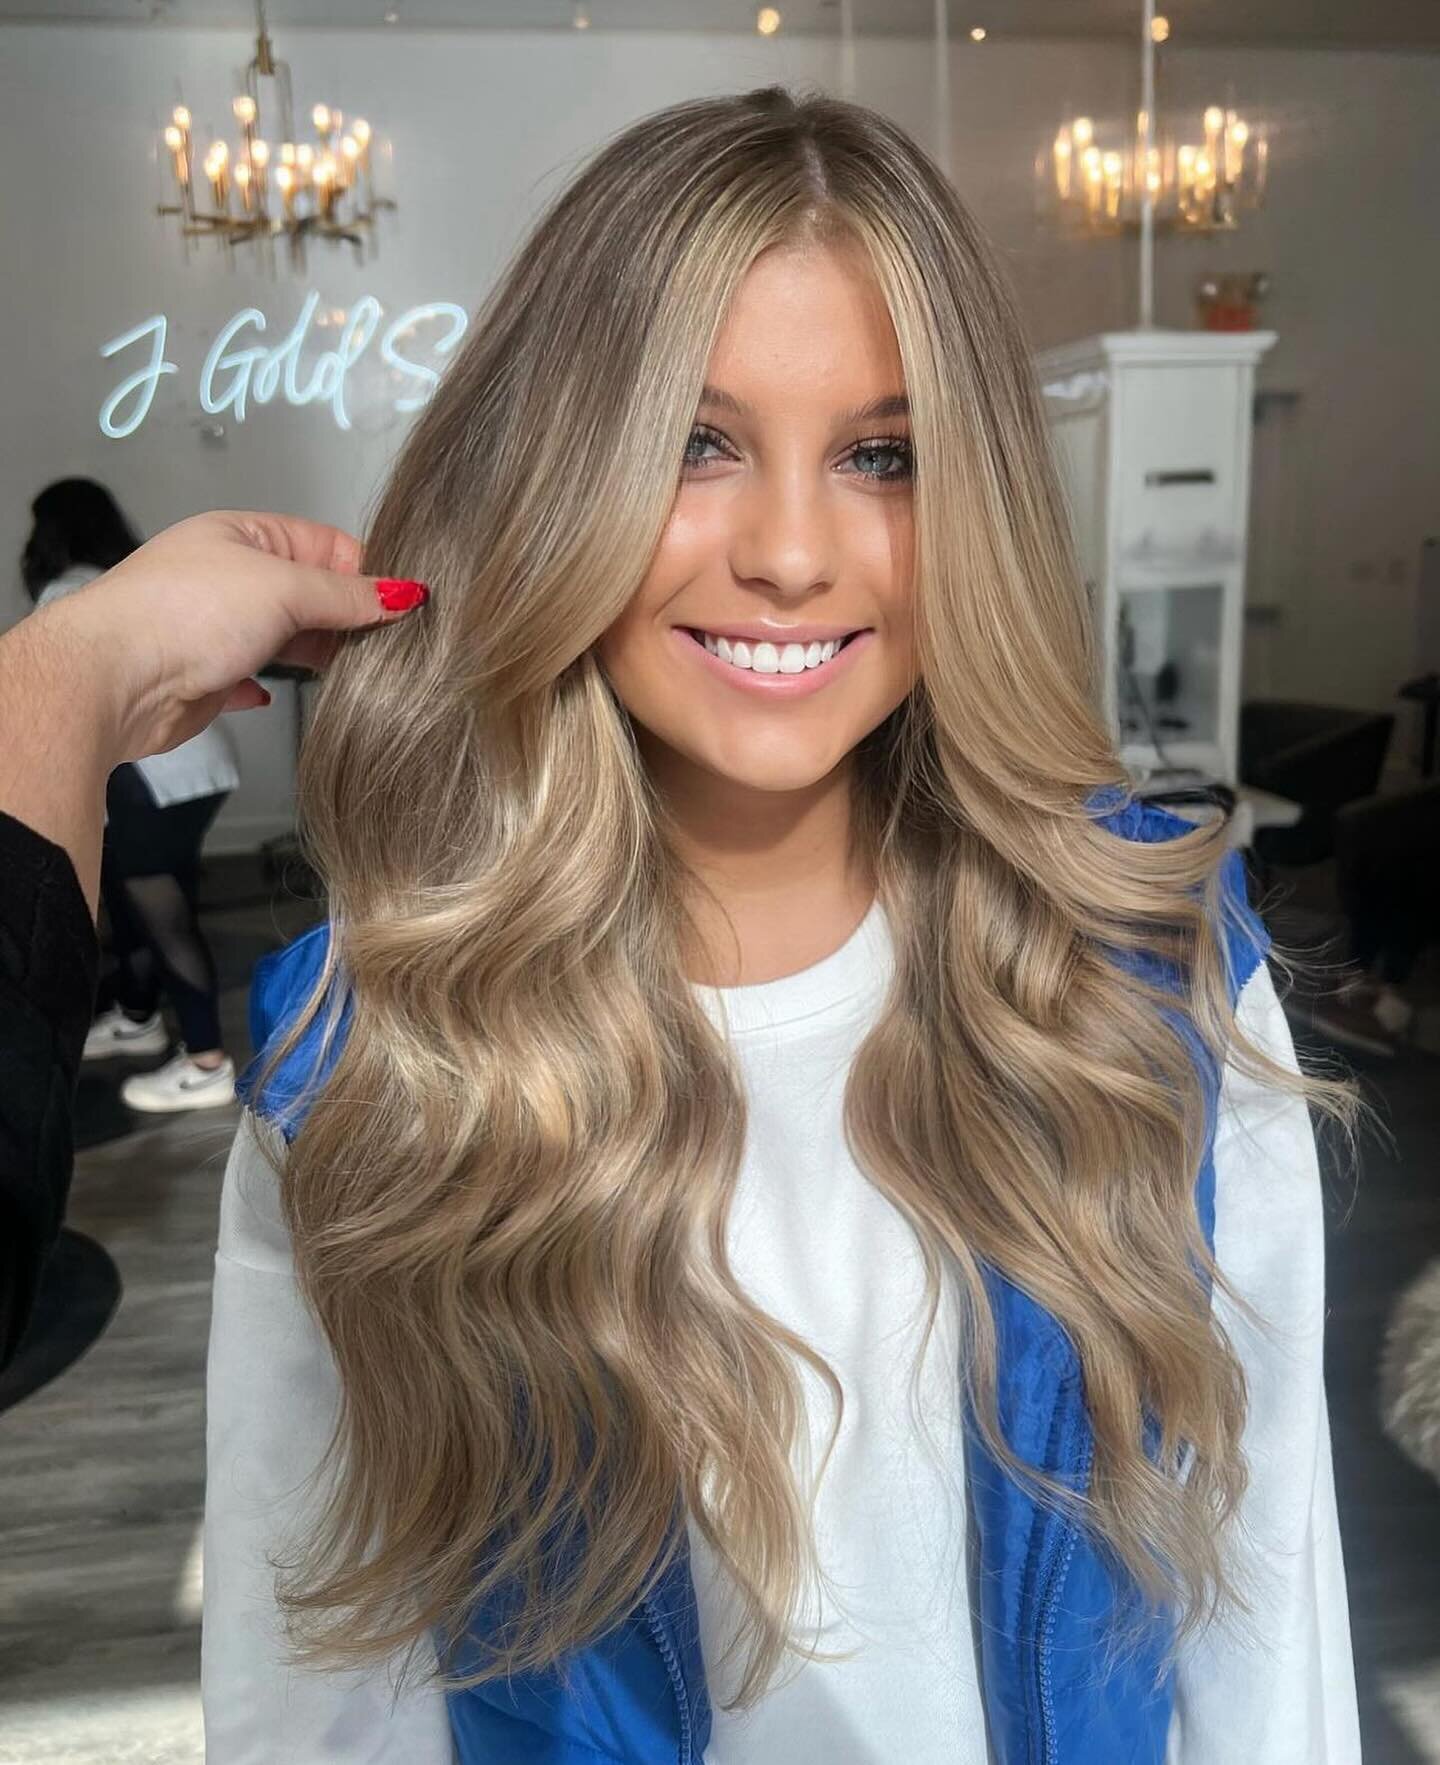 Submitted @emma.chafin ☀️☀️ @hairby_natttt_ 

#atlbalayage #balayage #sunkissedhair